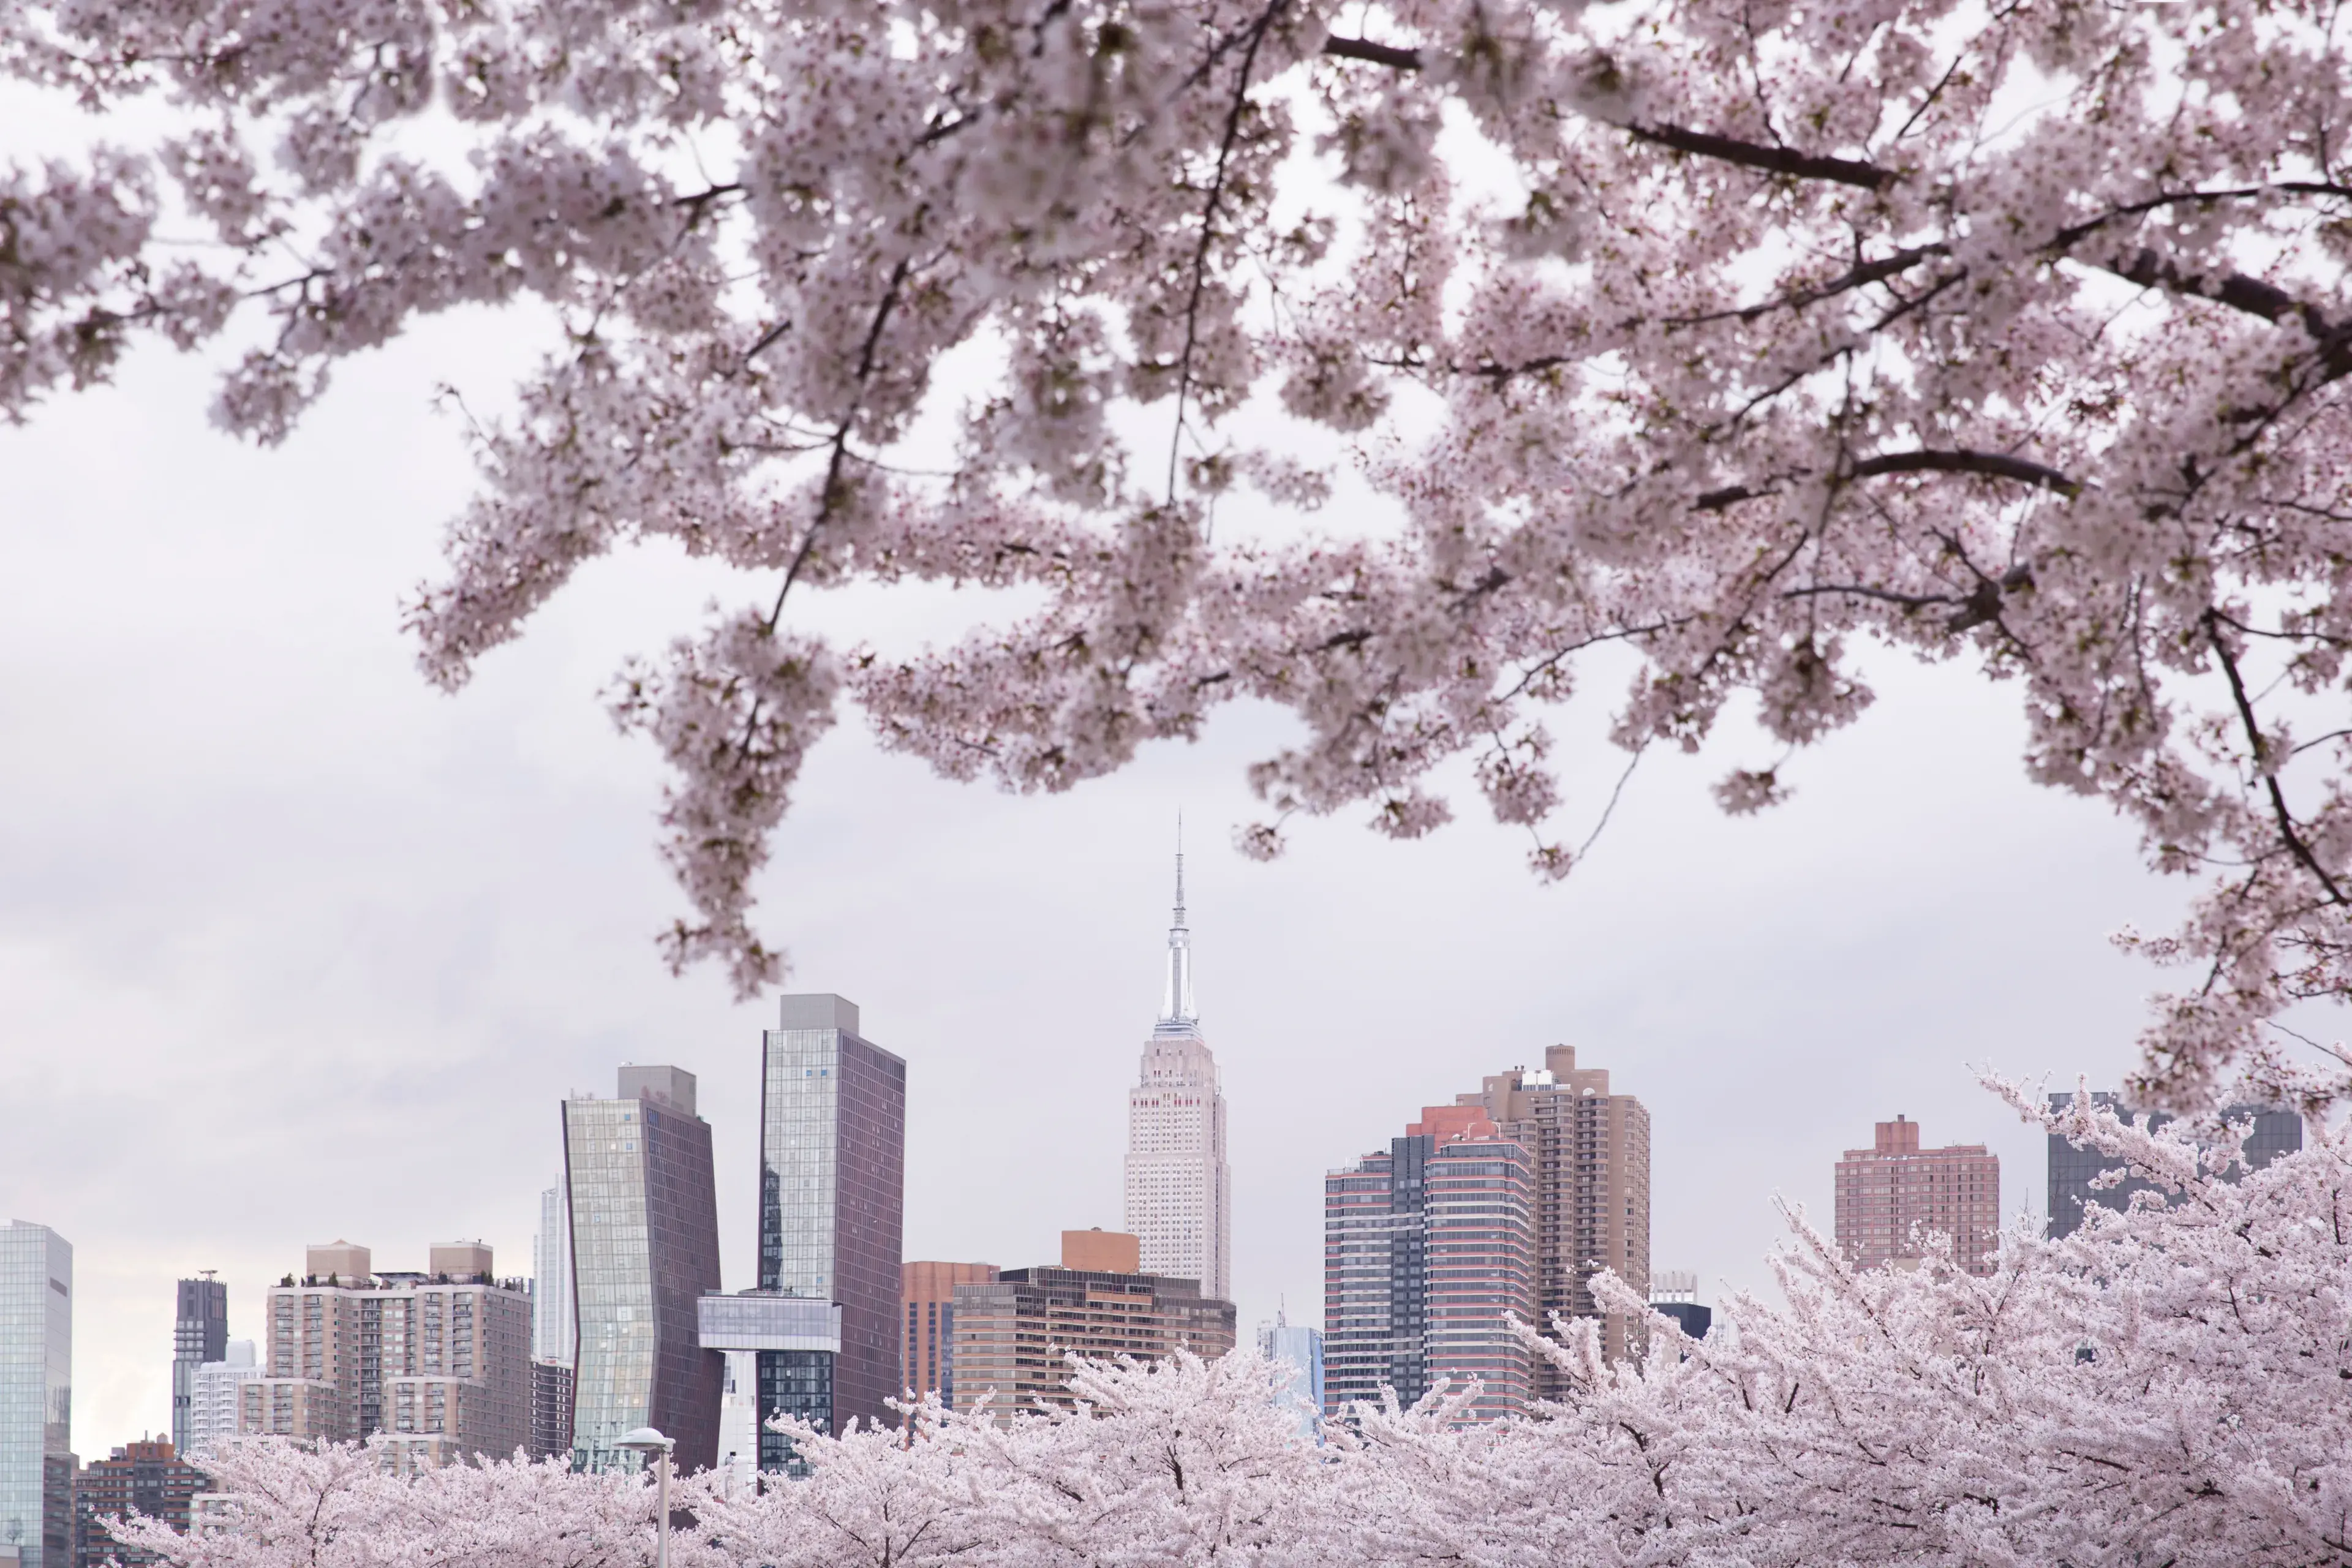 New York city, USA - April 9th 2022: Beautiful view of Cherry blossom with Empire state building and American copper buildings at the background. View from Long island city at New York city.